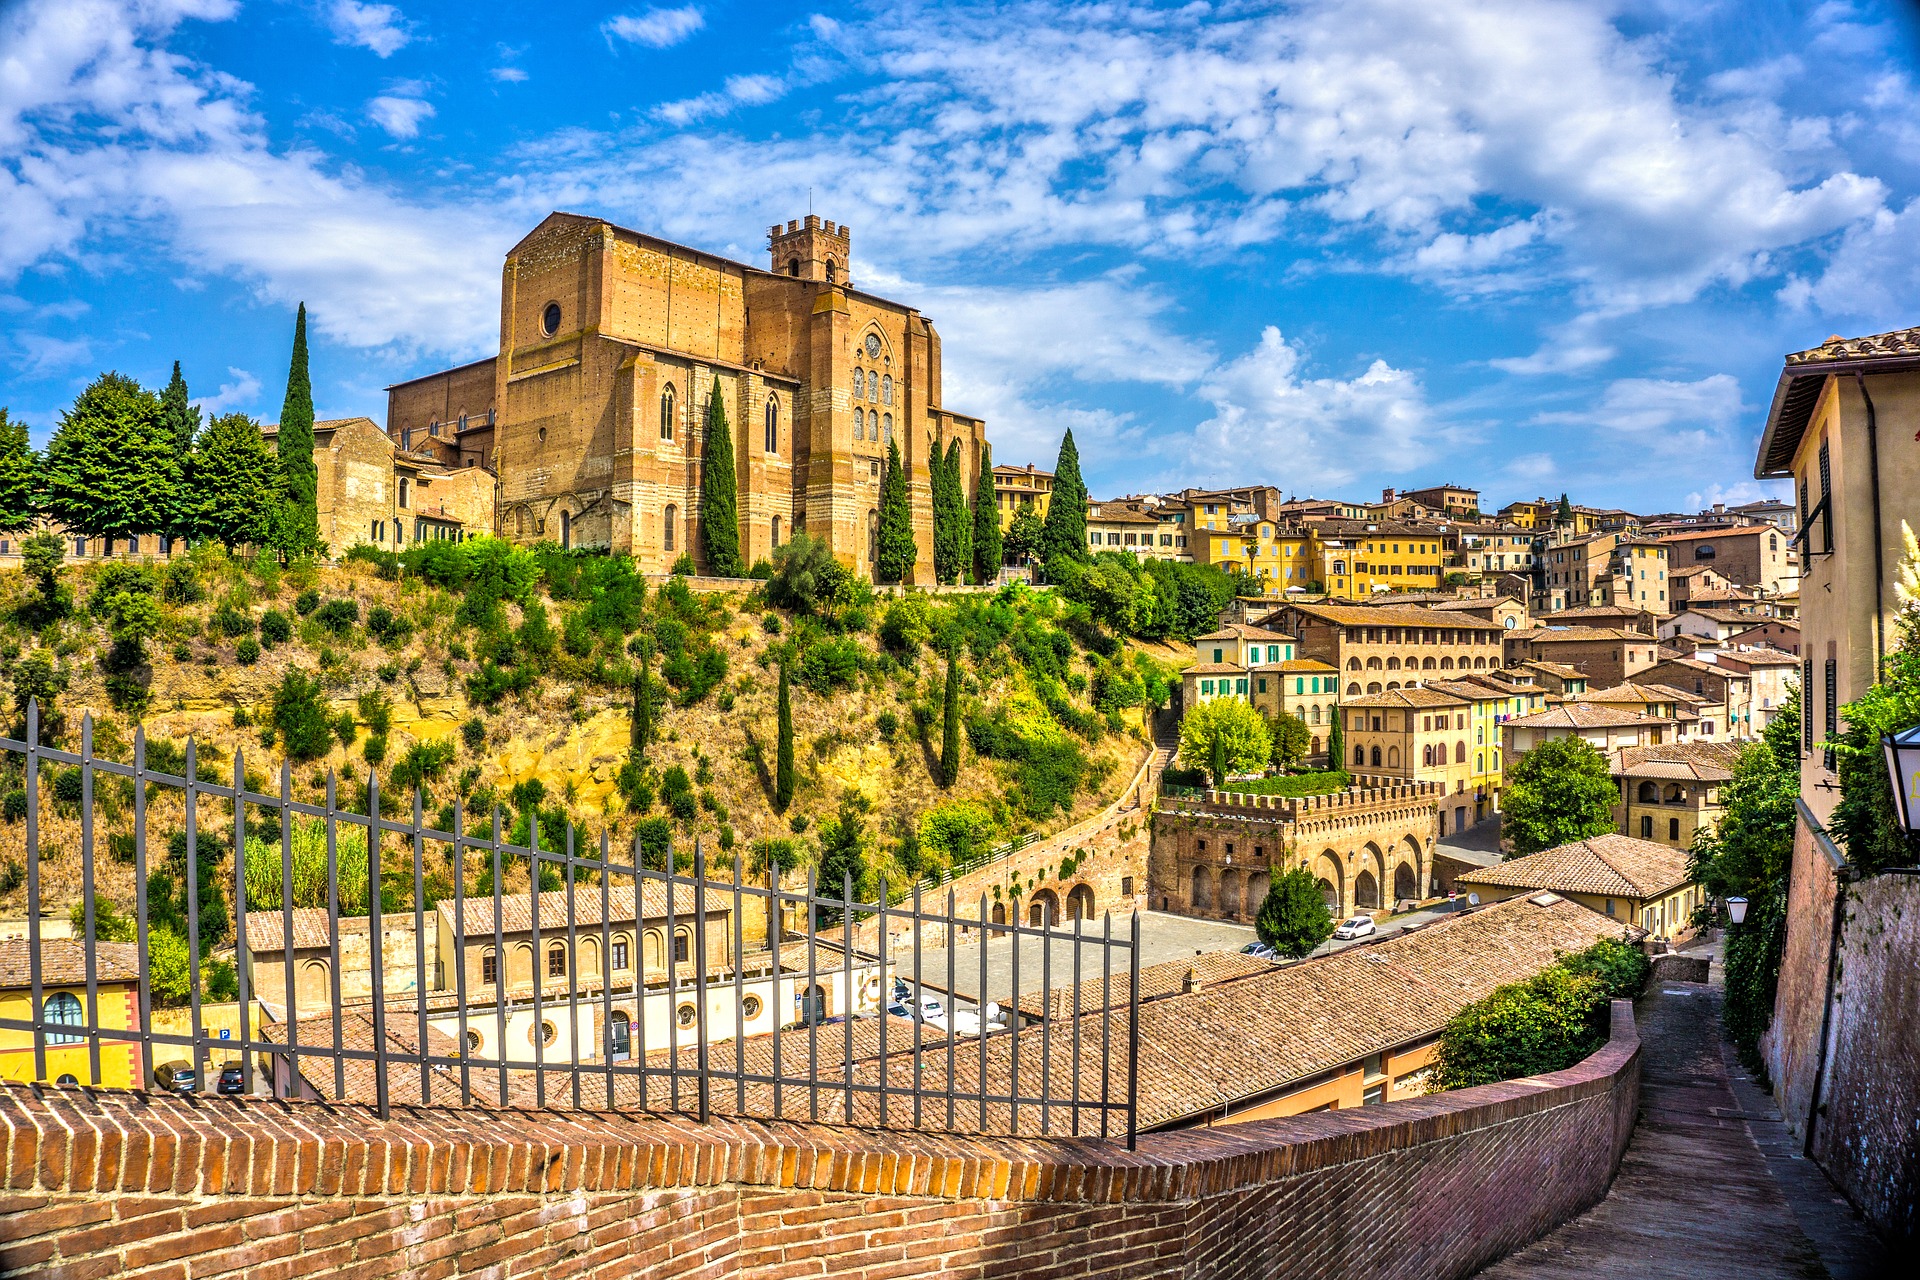 Tuscan Villages - Siena, Italy